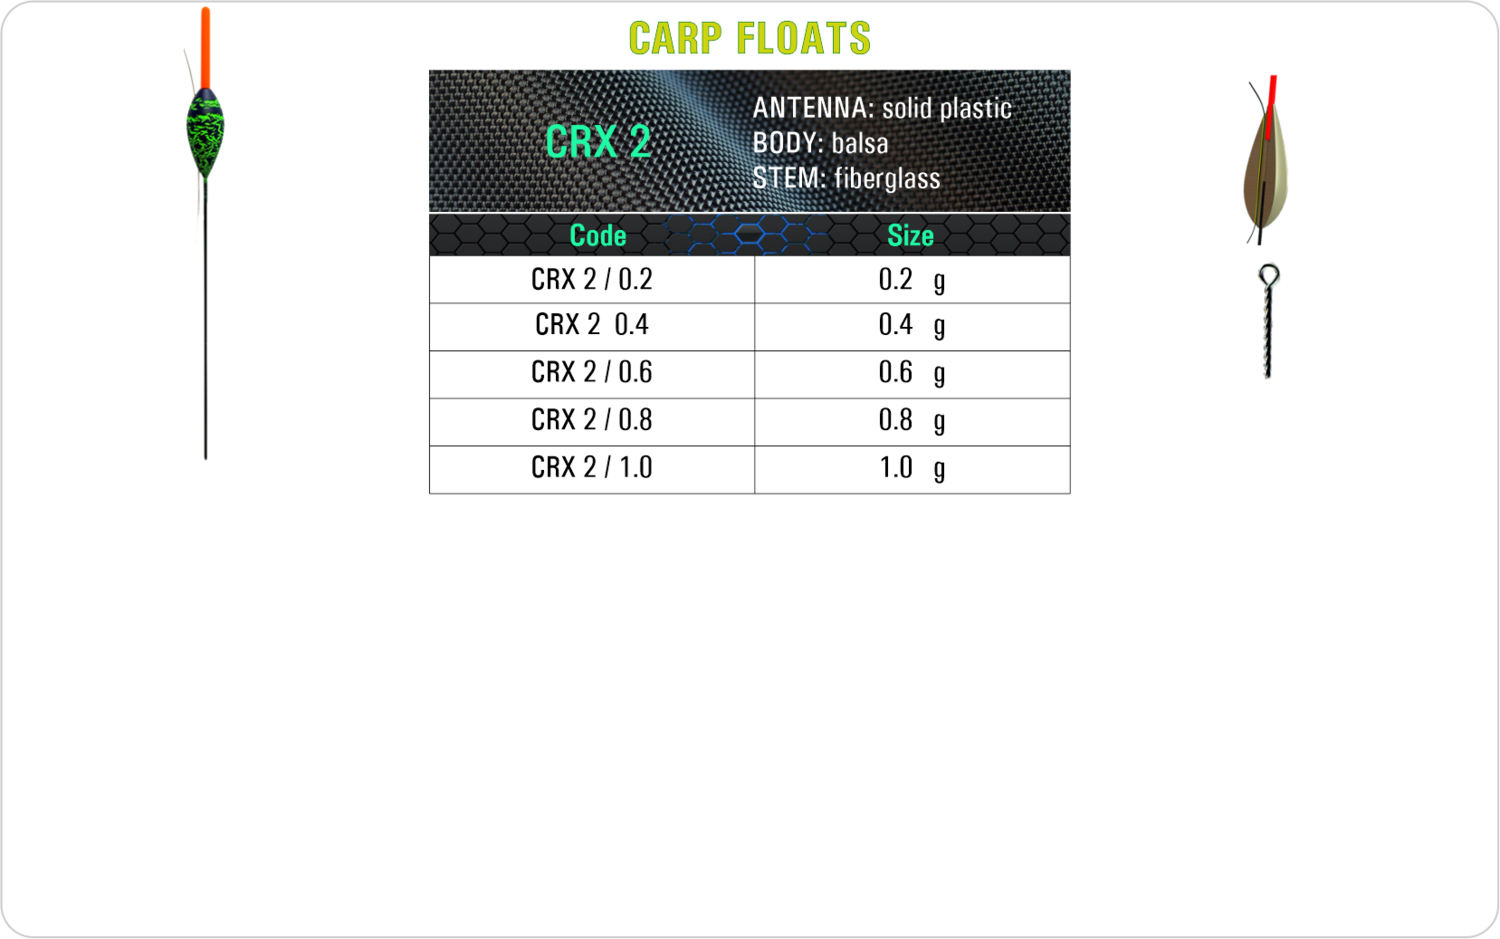 SF CRX 2 Carp float model and table containing an additional information about this float with different codes, sizes, types of the body, the stem and the antenna of the float.